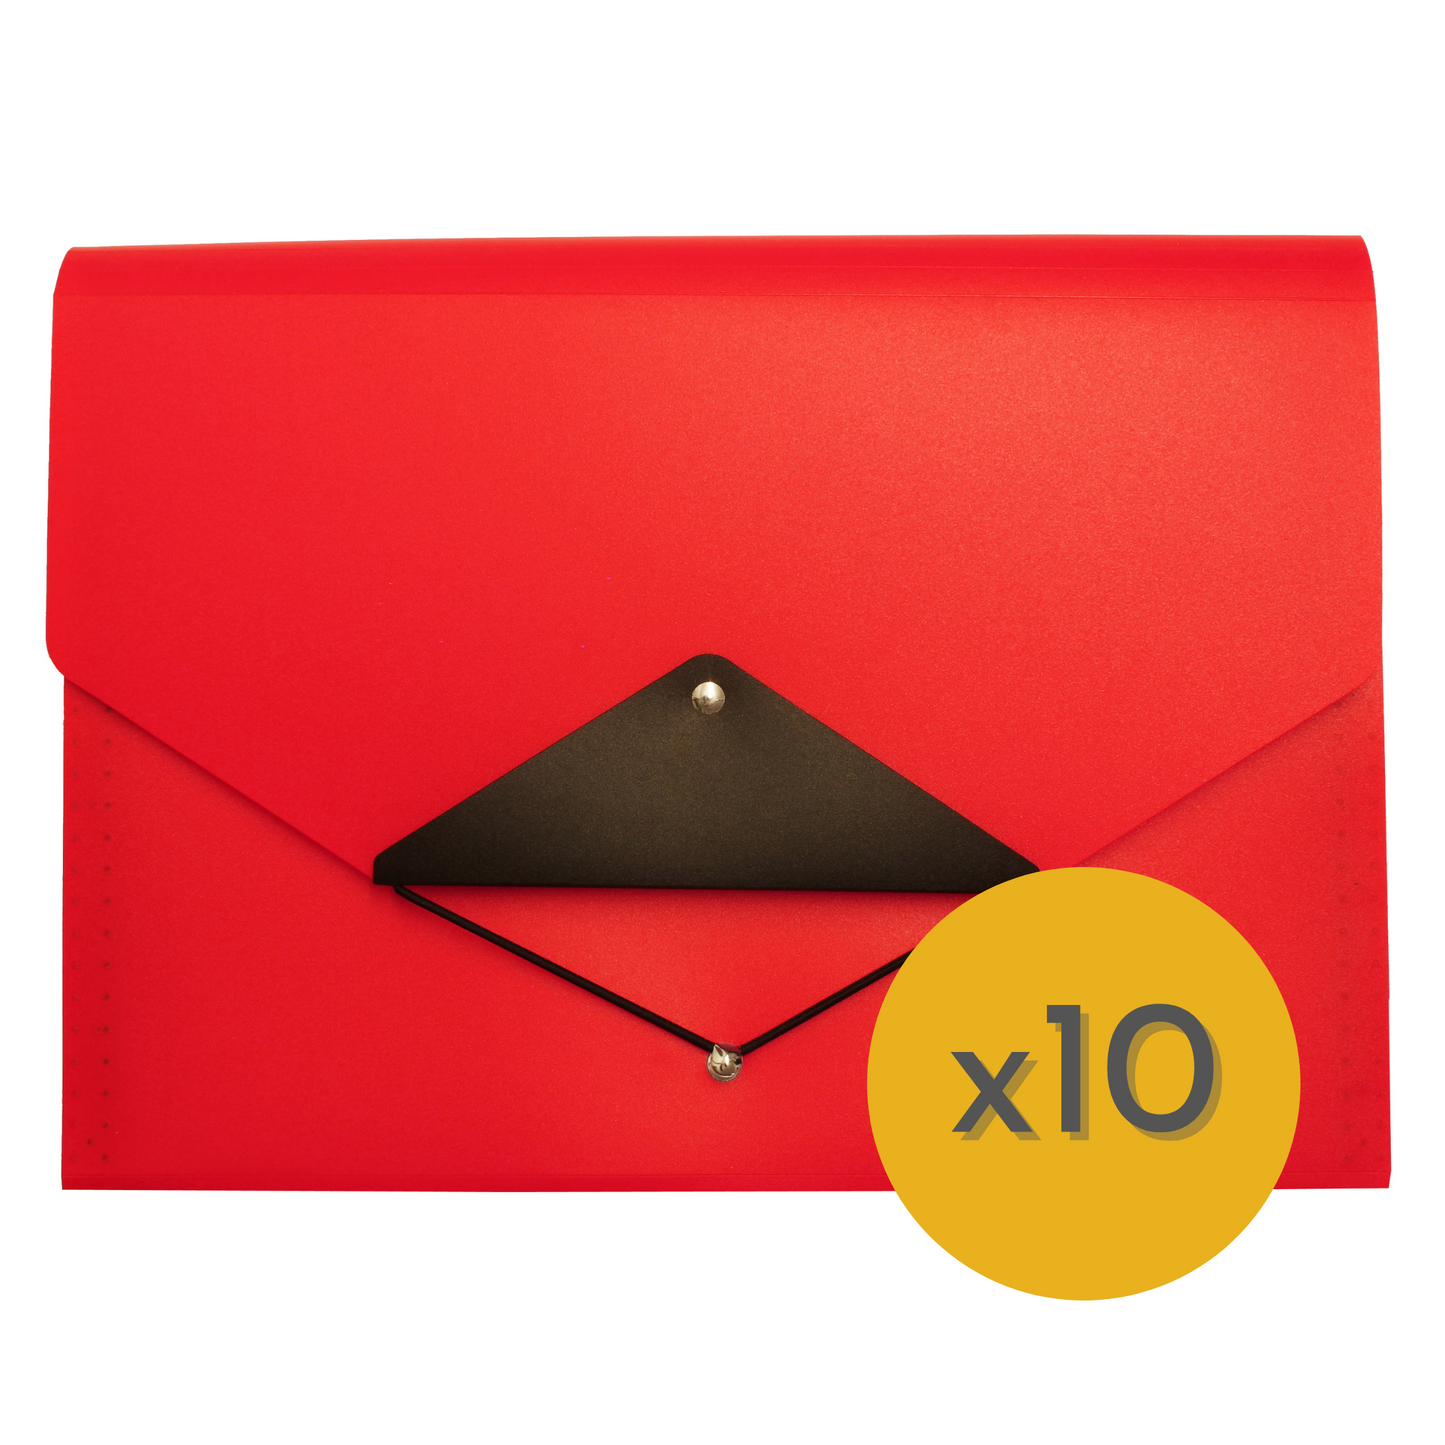 A red polypropylene expanding file with a black elastic closure, accompanied by a yellow circle graphic with 'x10' indicating it is part of a value bundle.